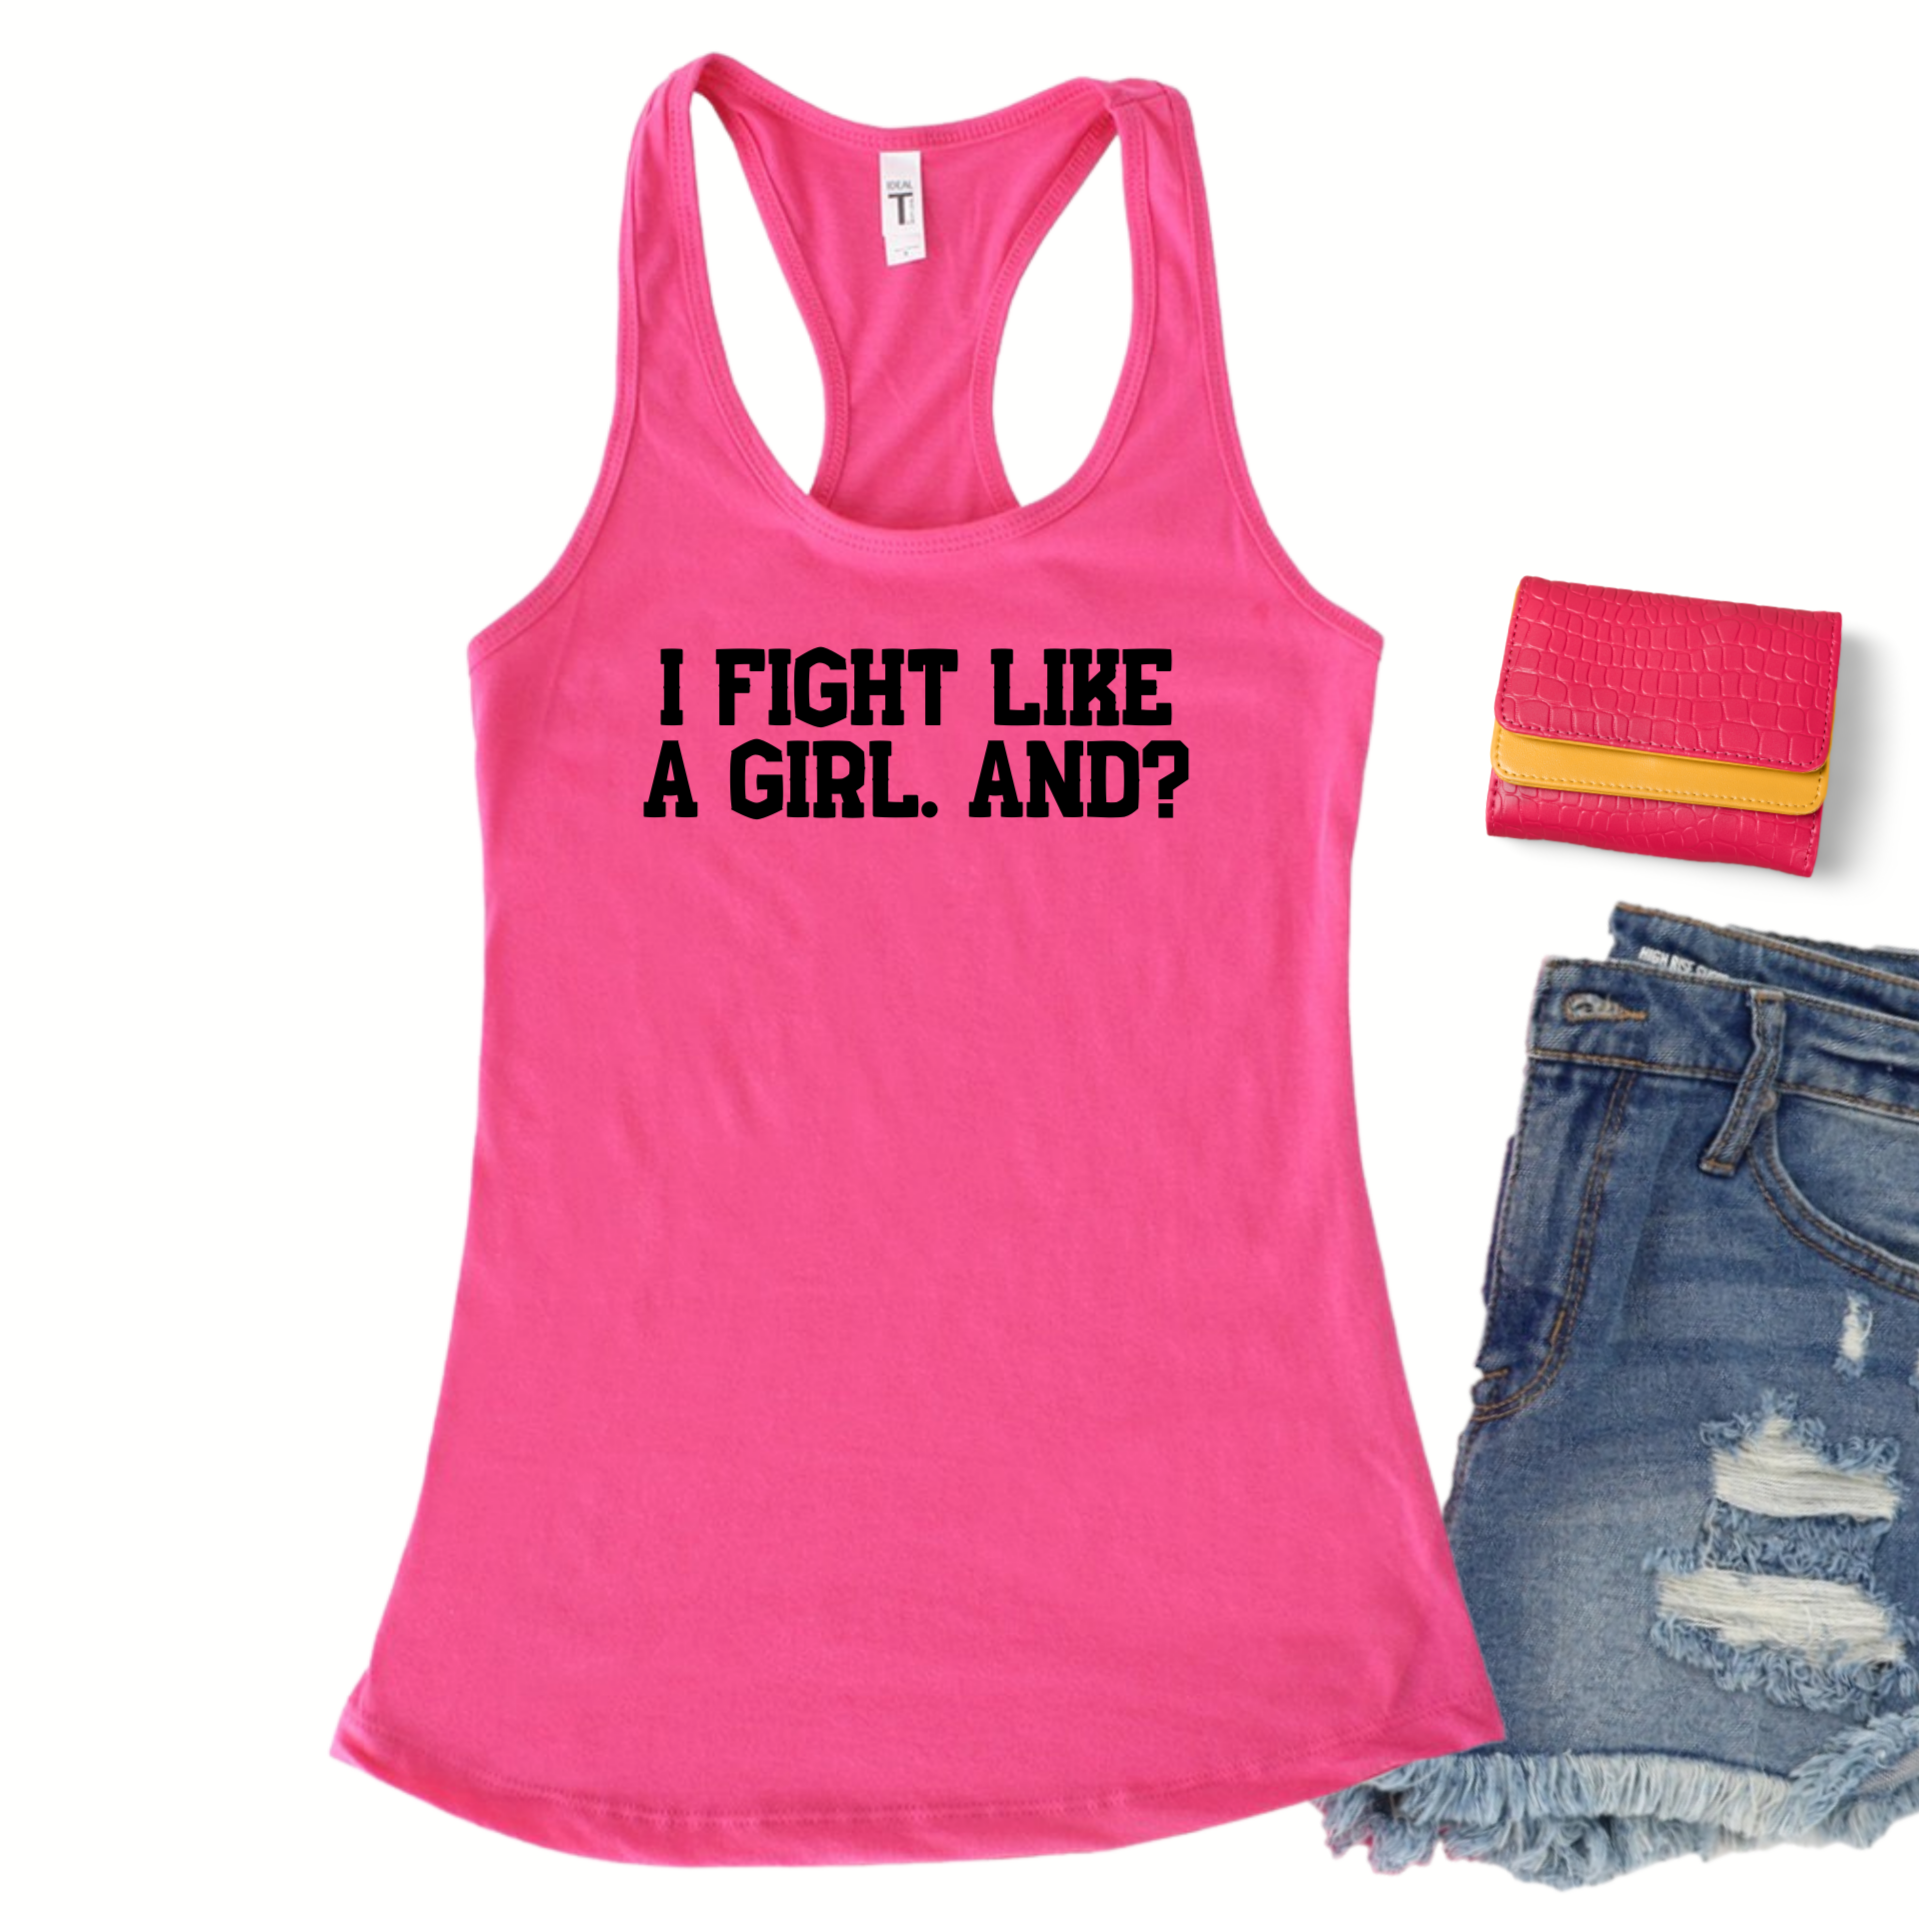 I fight like a girl. And? in black on a Next Level 1533 tank in Raspberry.